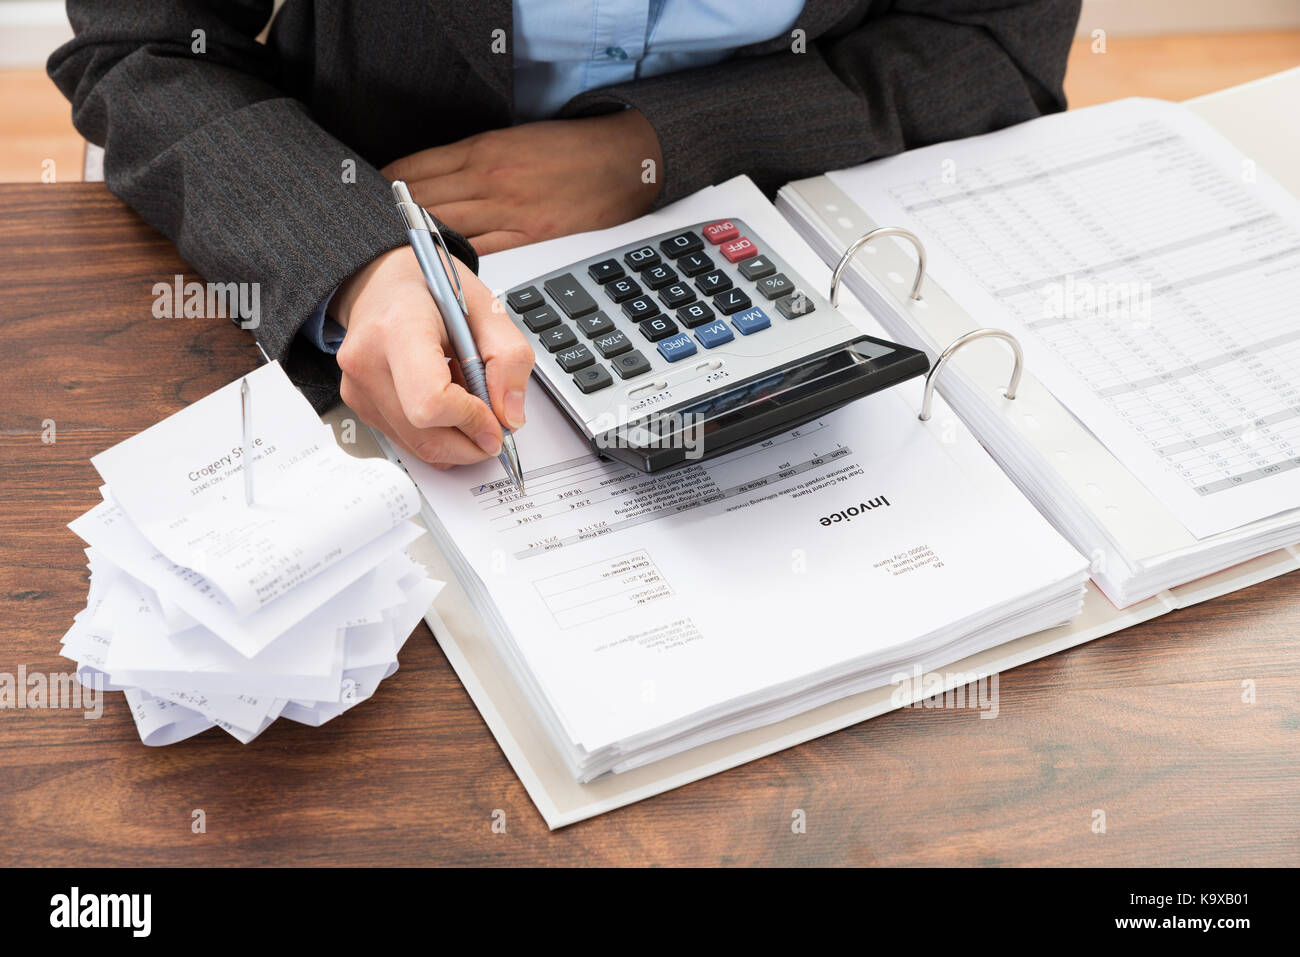 Close-up Of Businessperson Calculating Bills At Desk Stock Photo